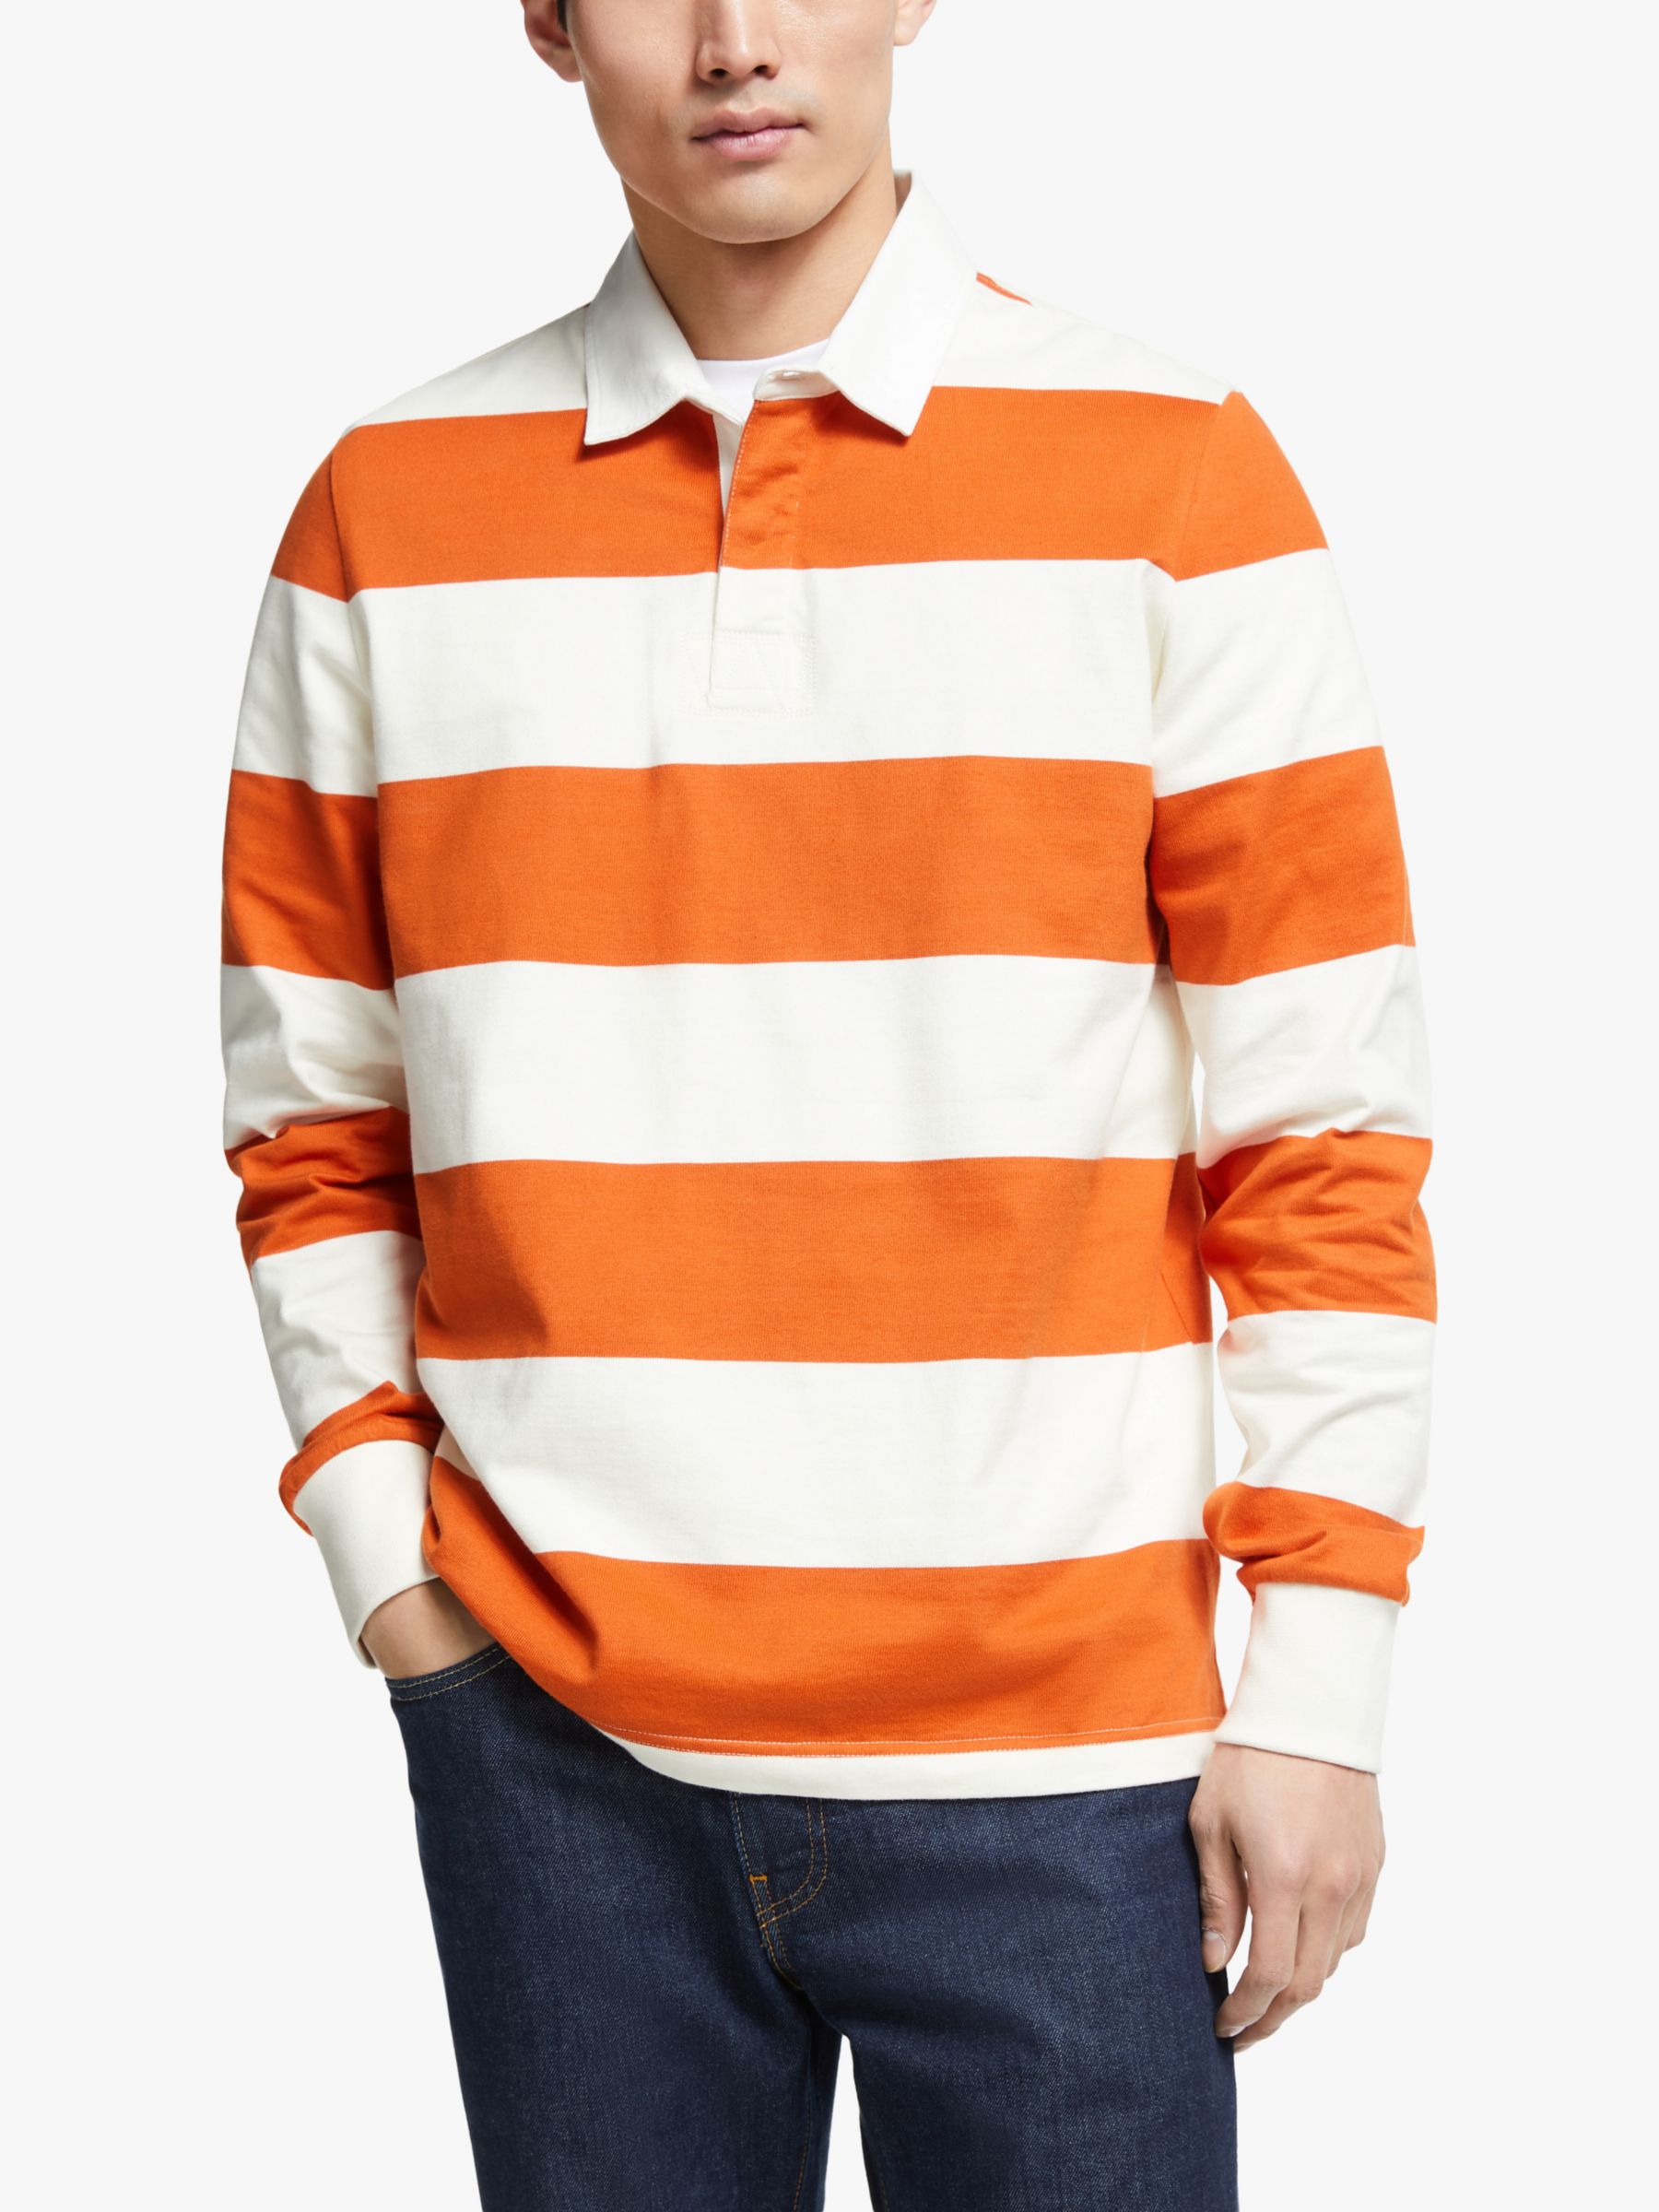 Men's Signature Classic Rugby Shirt, Long-Sleeve Stripe, 46% OFF